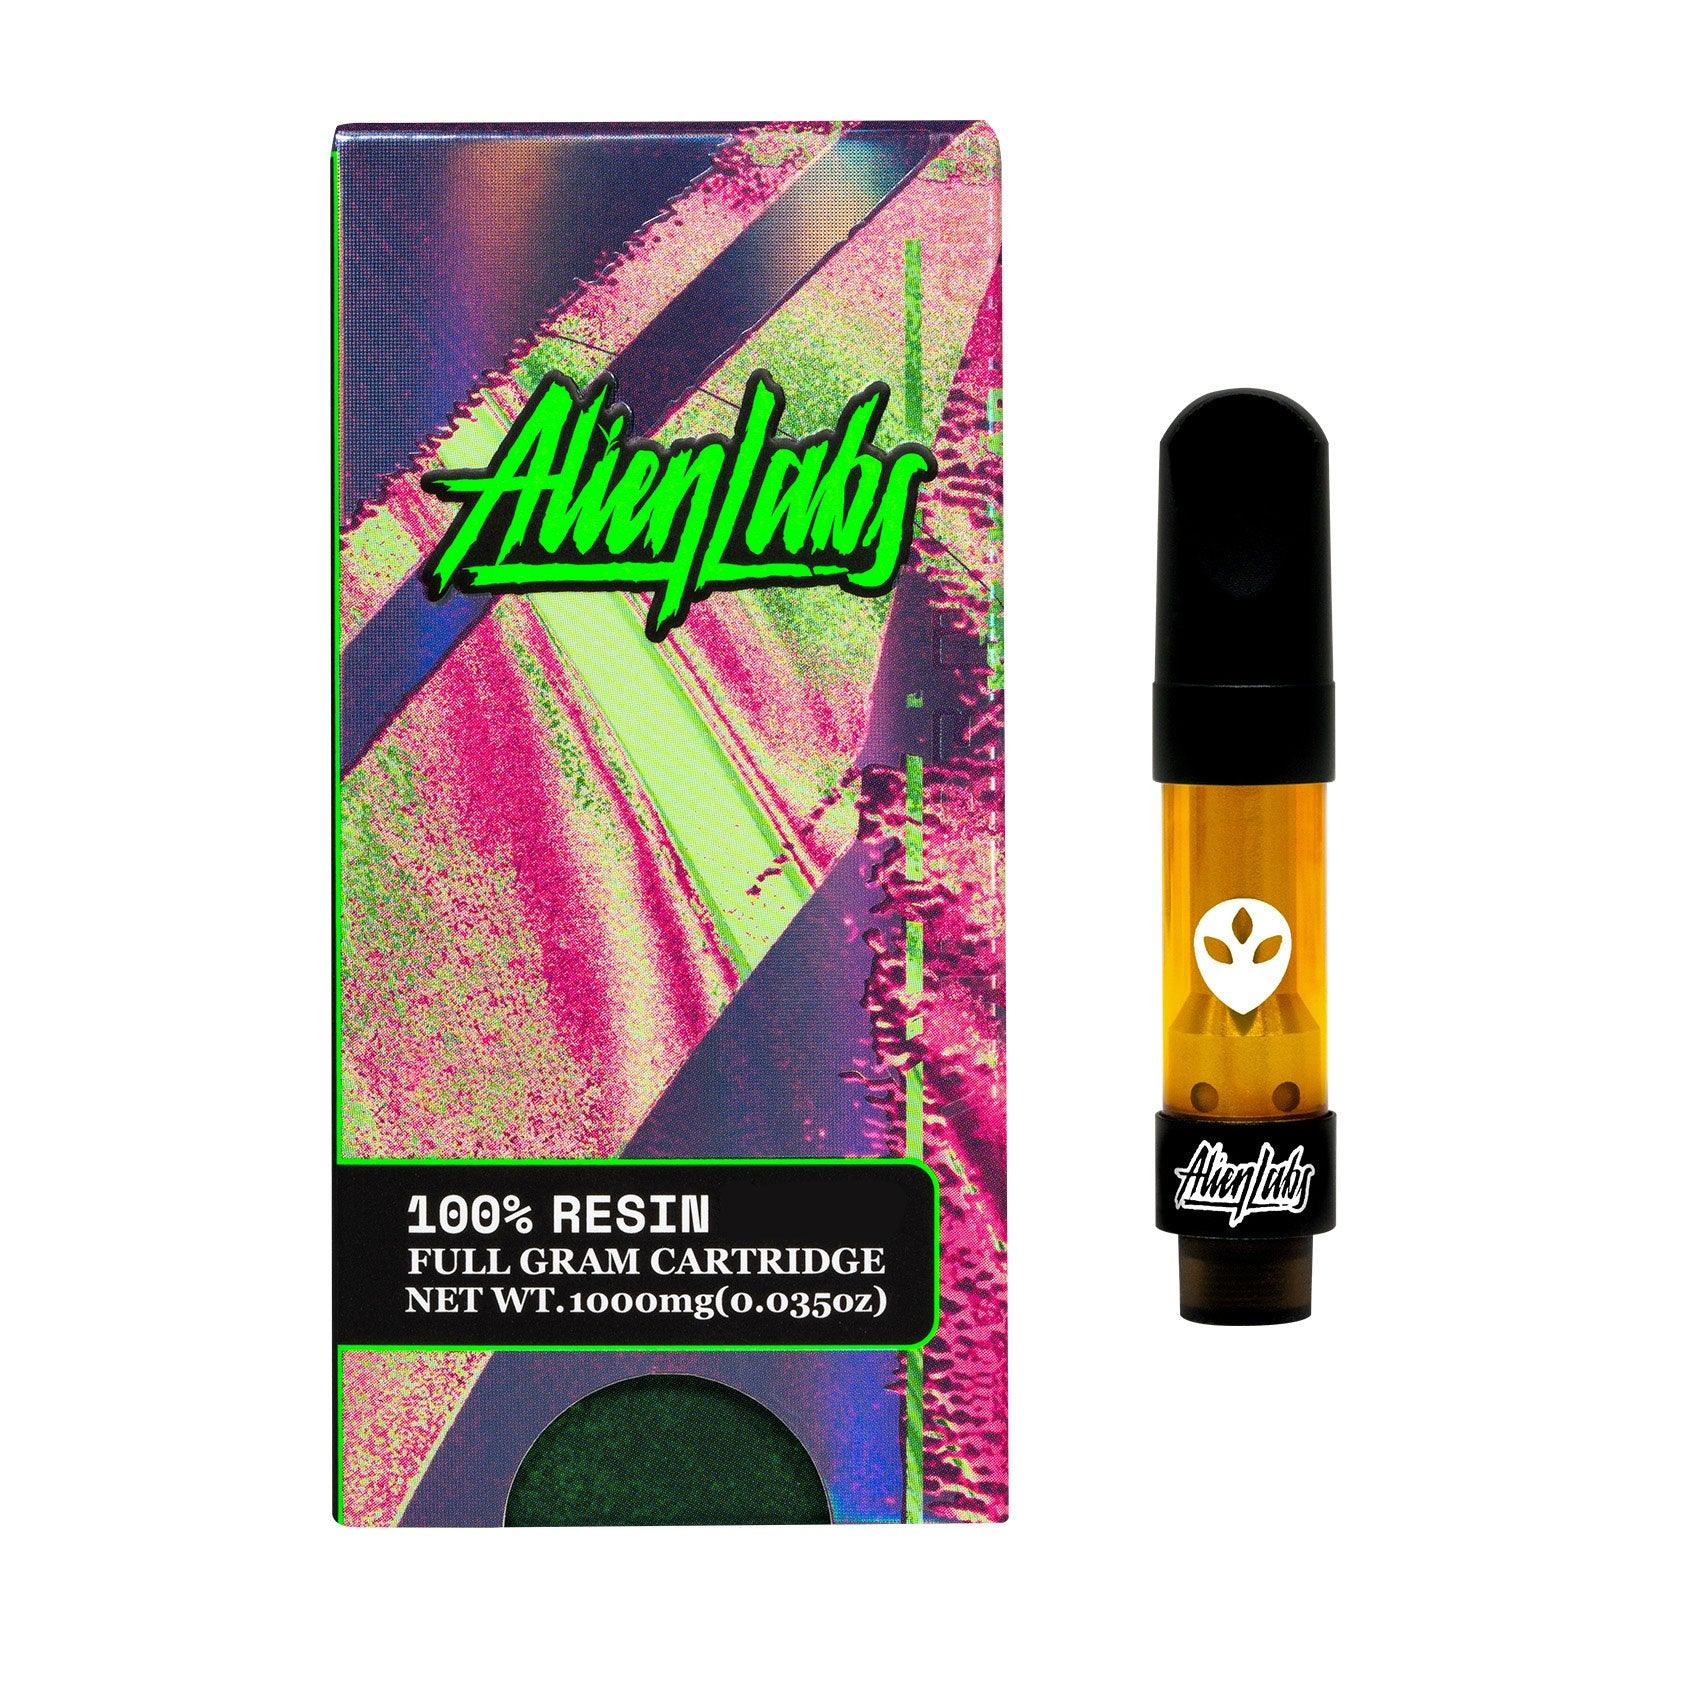 Alien Labs Live Resin Carts: A Stellar Experience - Alien Labs